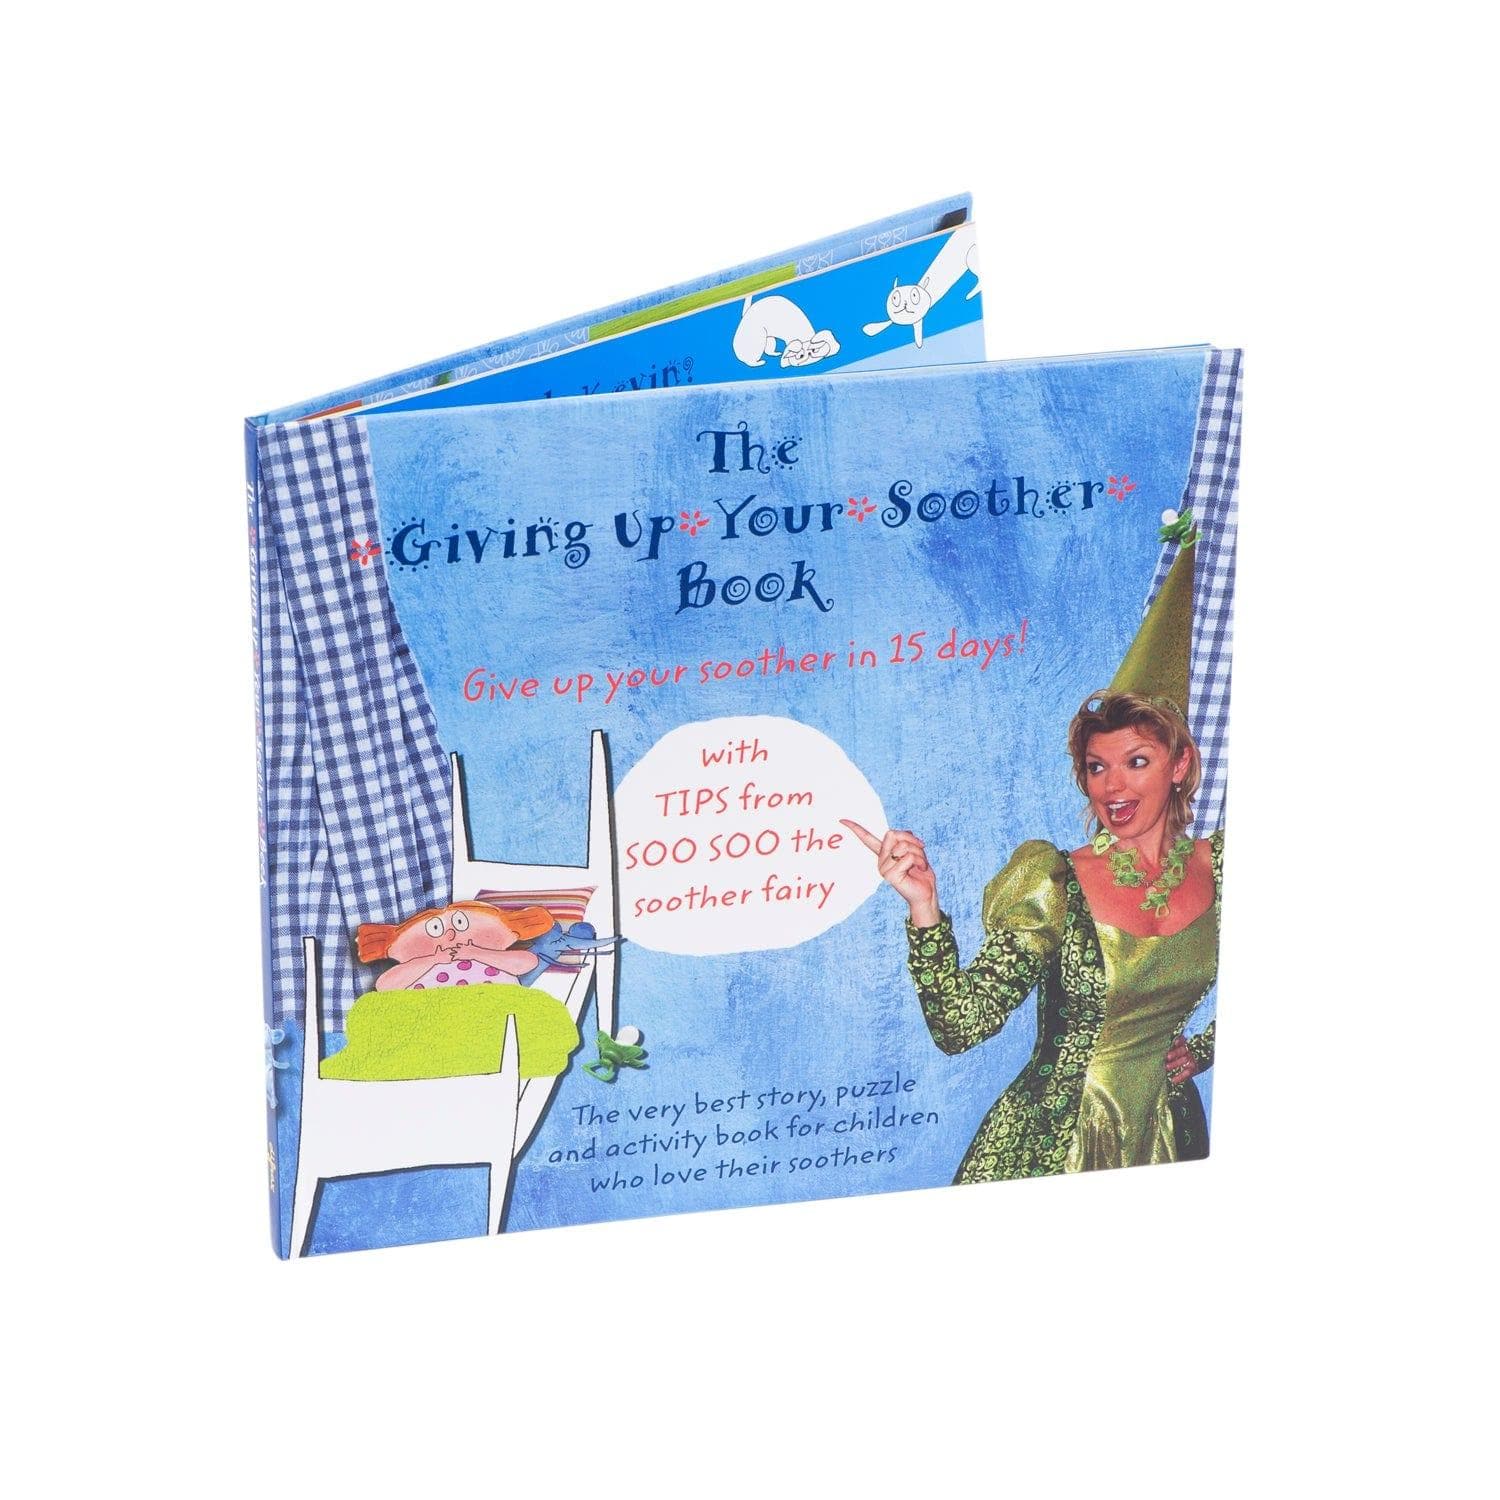 book to give up your soother